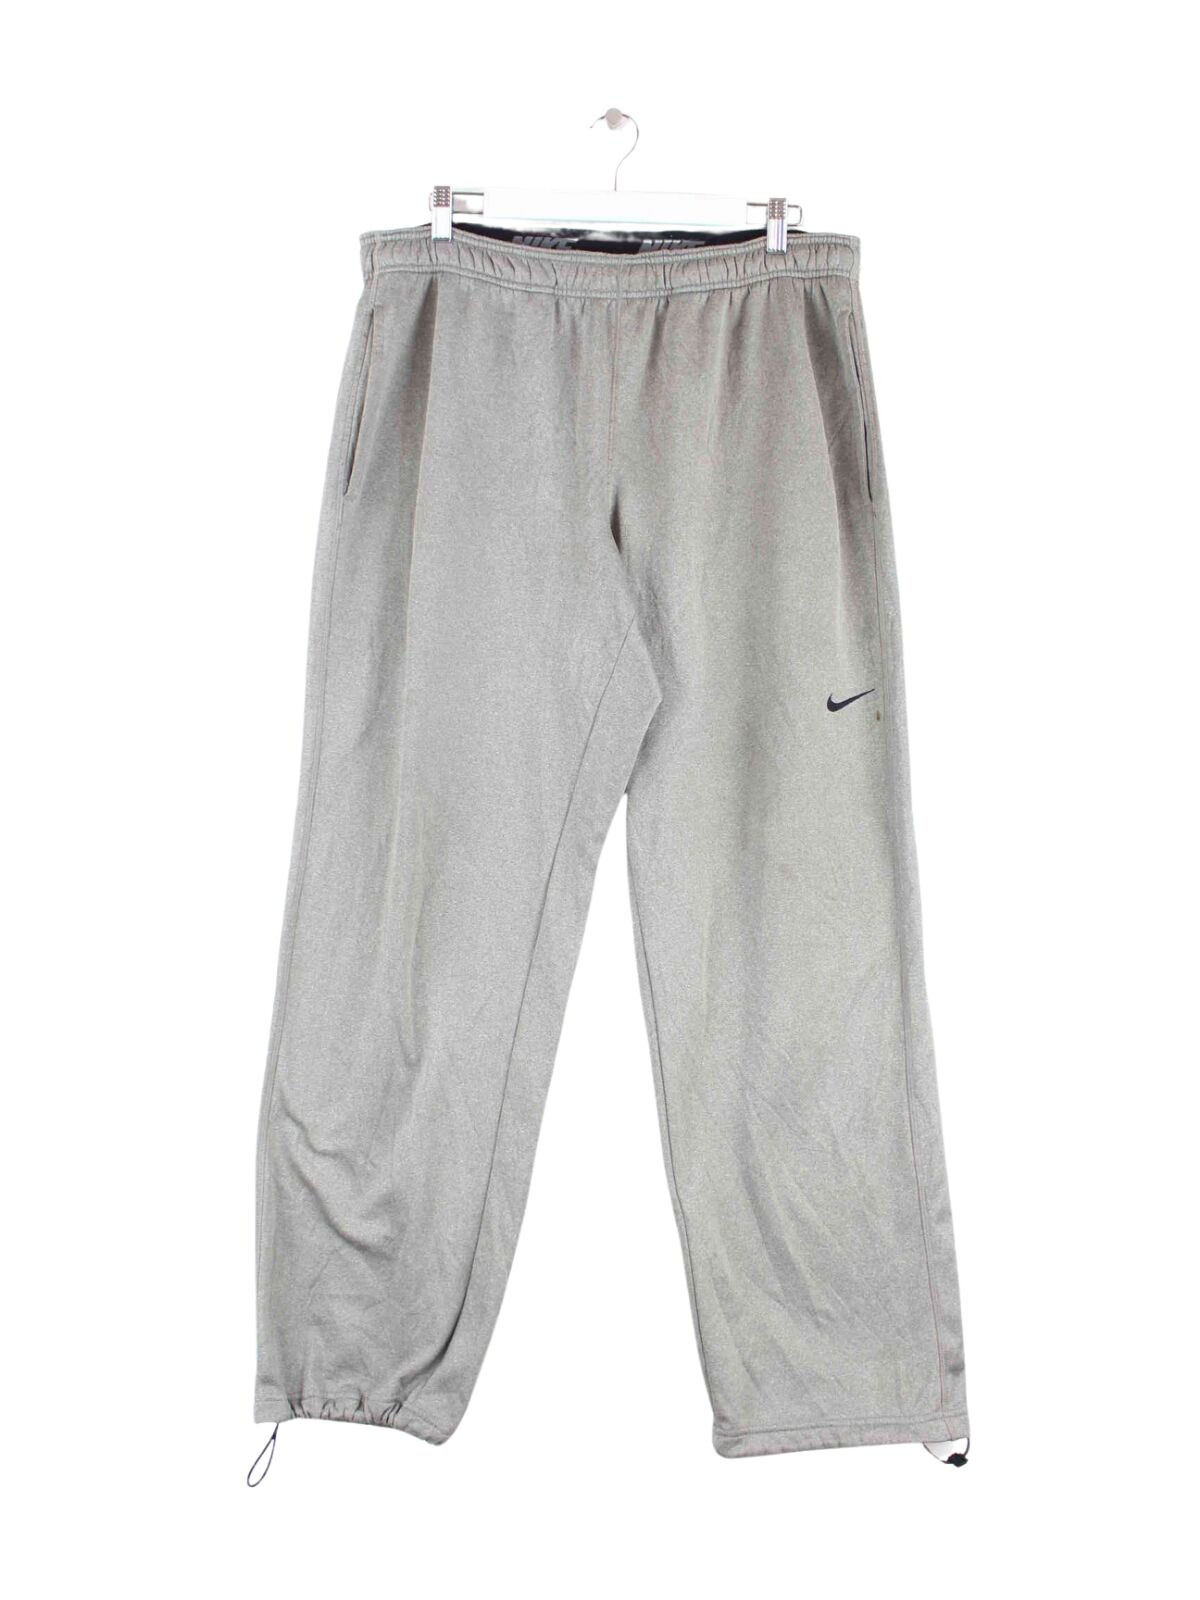 Nike Therma Fit Track Pants Grau L (front image)